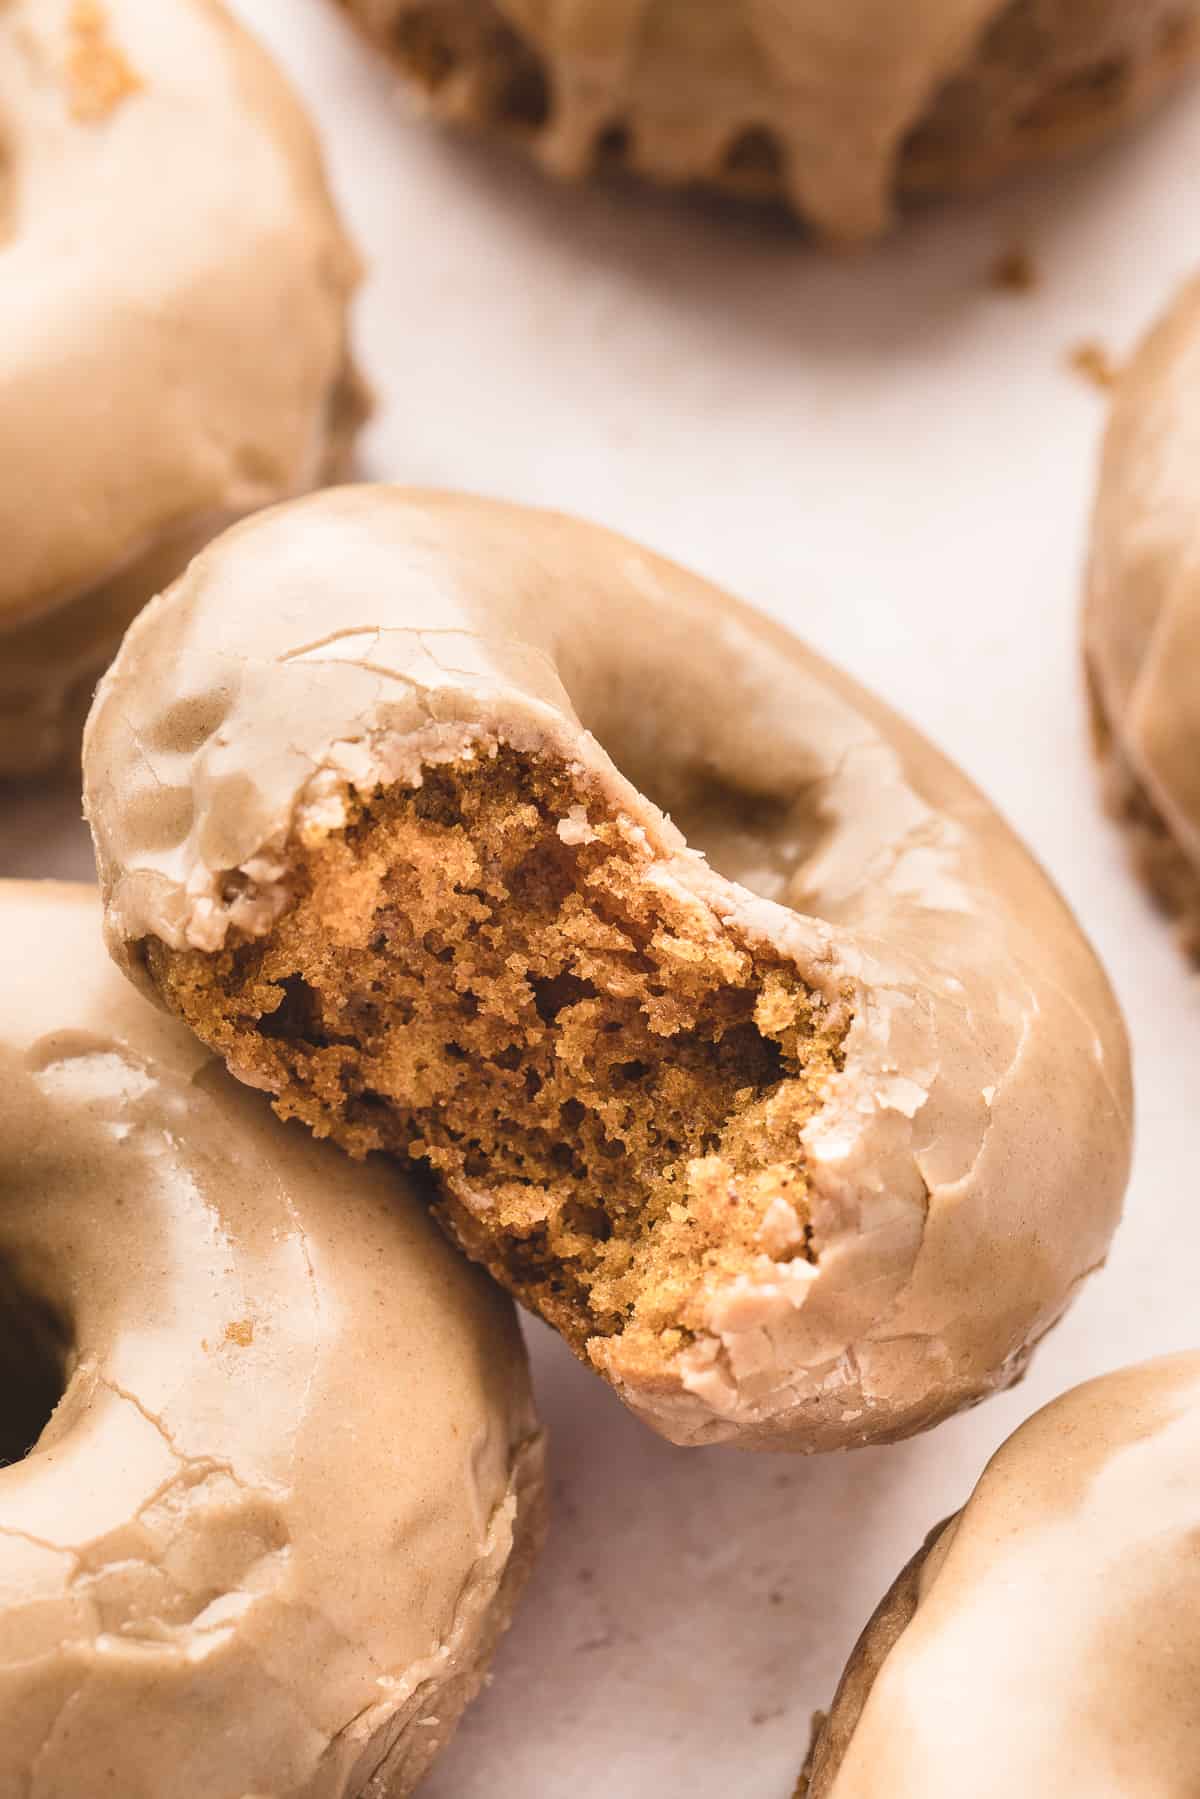 A pumpkin donut with maple glaze tilted up with a bite taken out to show the inside with other donuts around it.